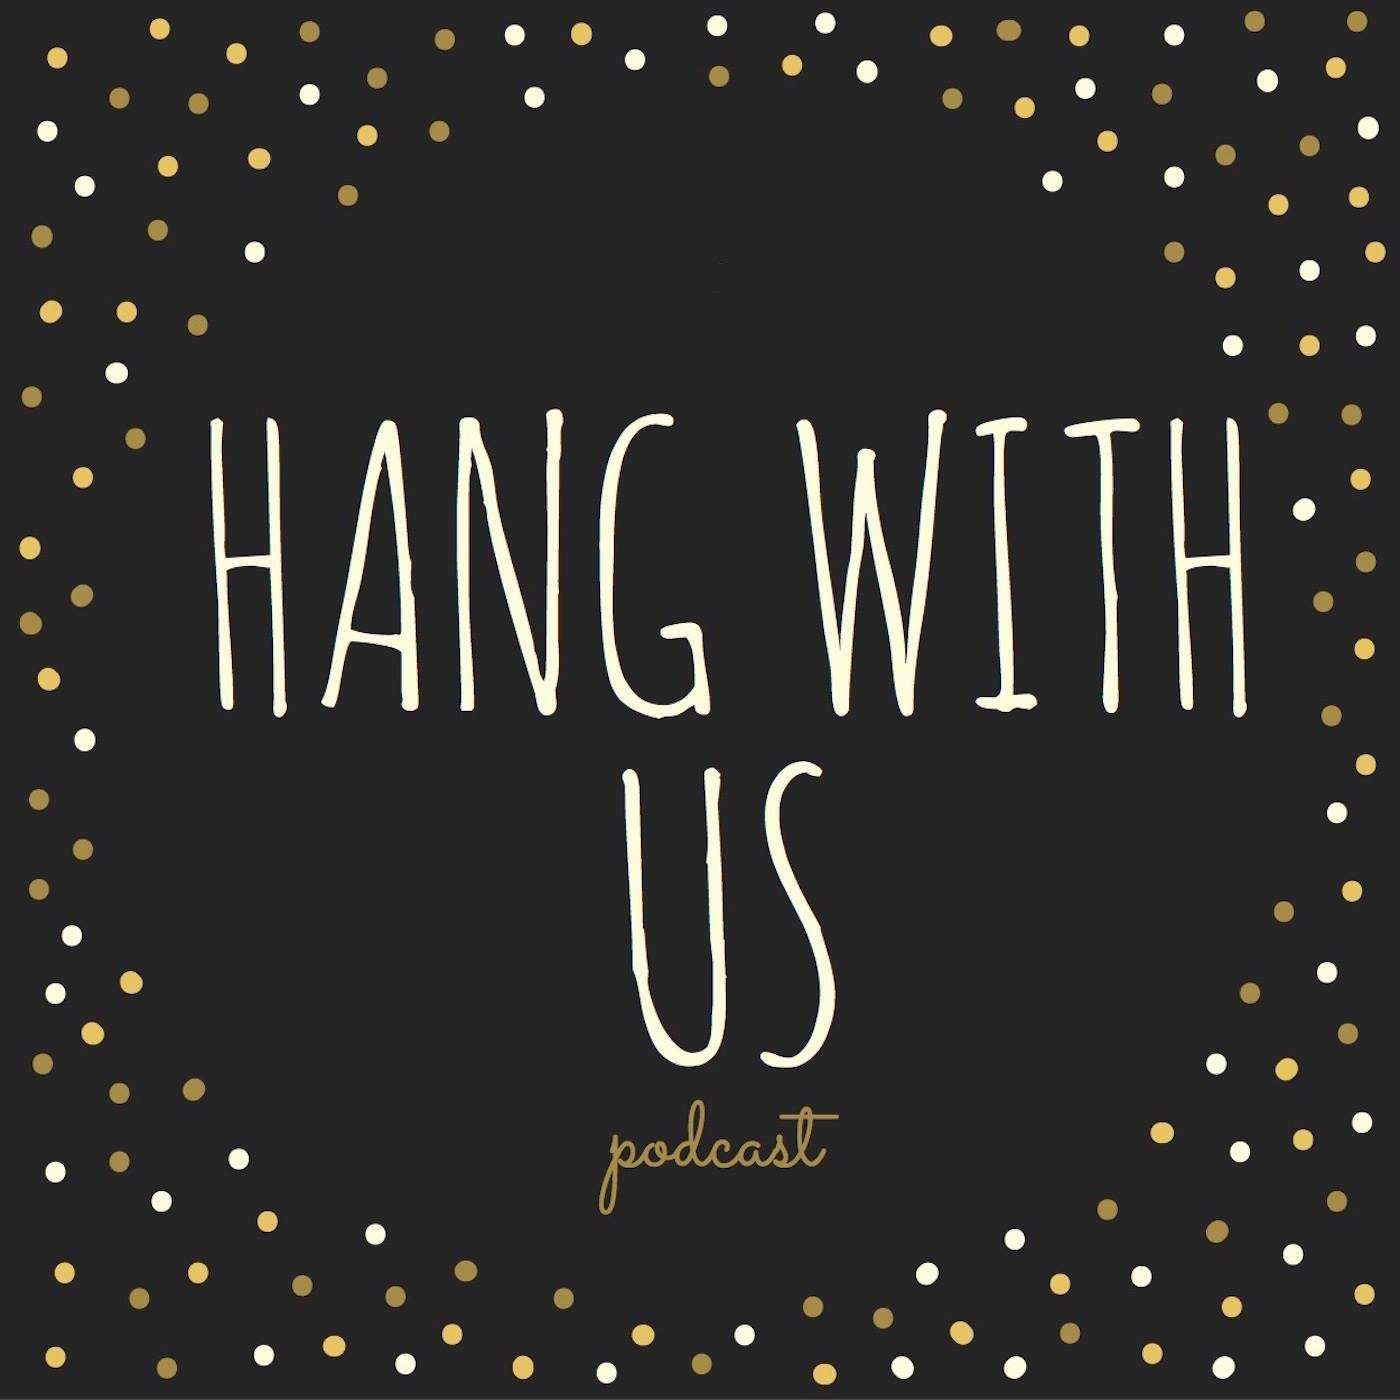 Hang With Us Podcast: Pop culture, politics and everyday 20-something struggles